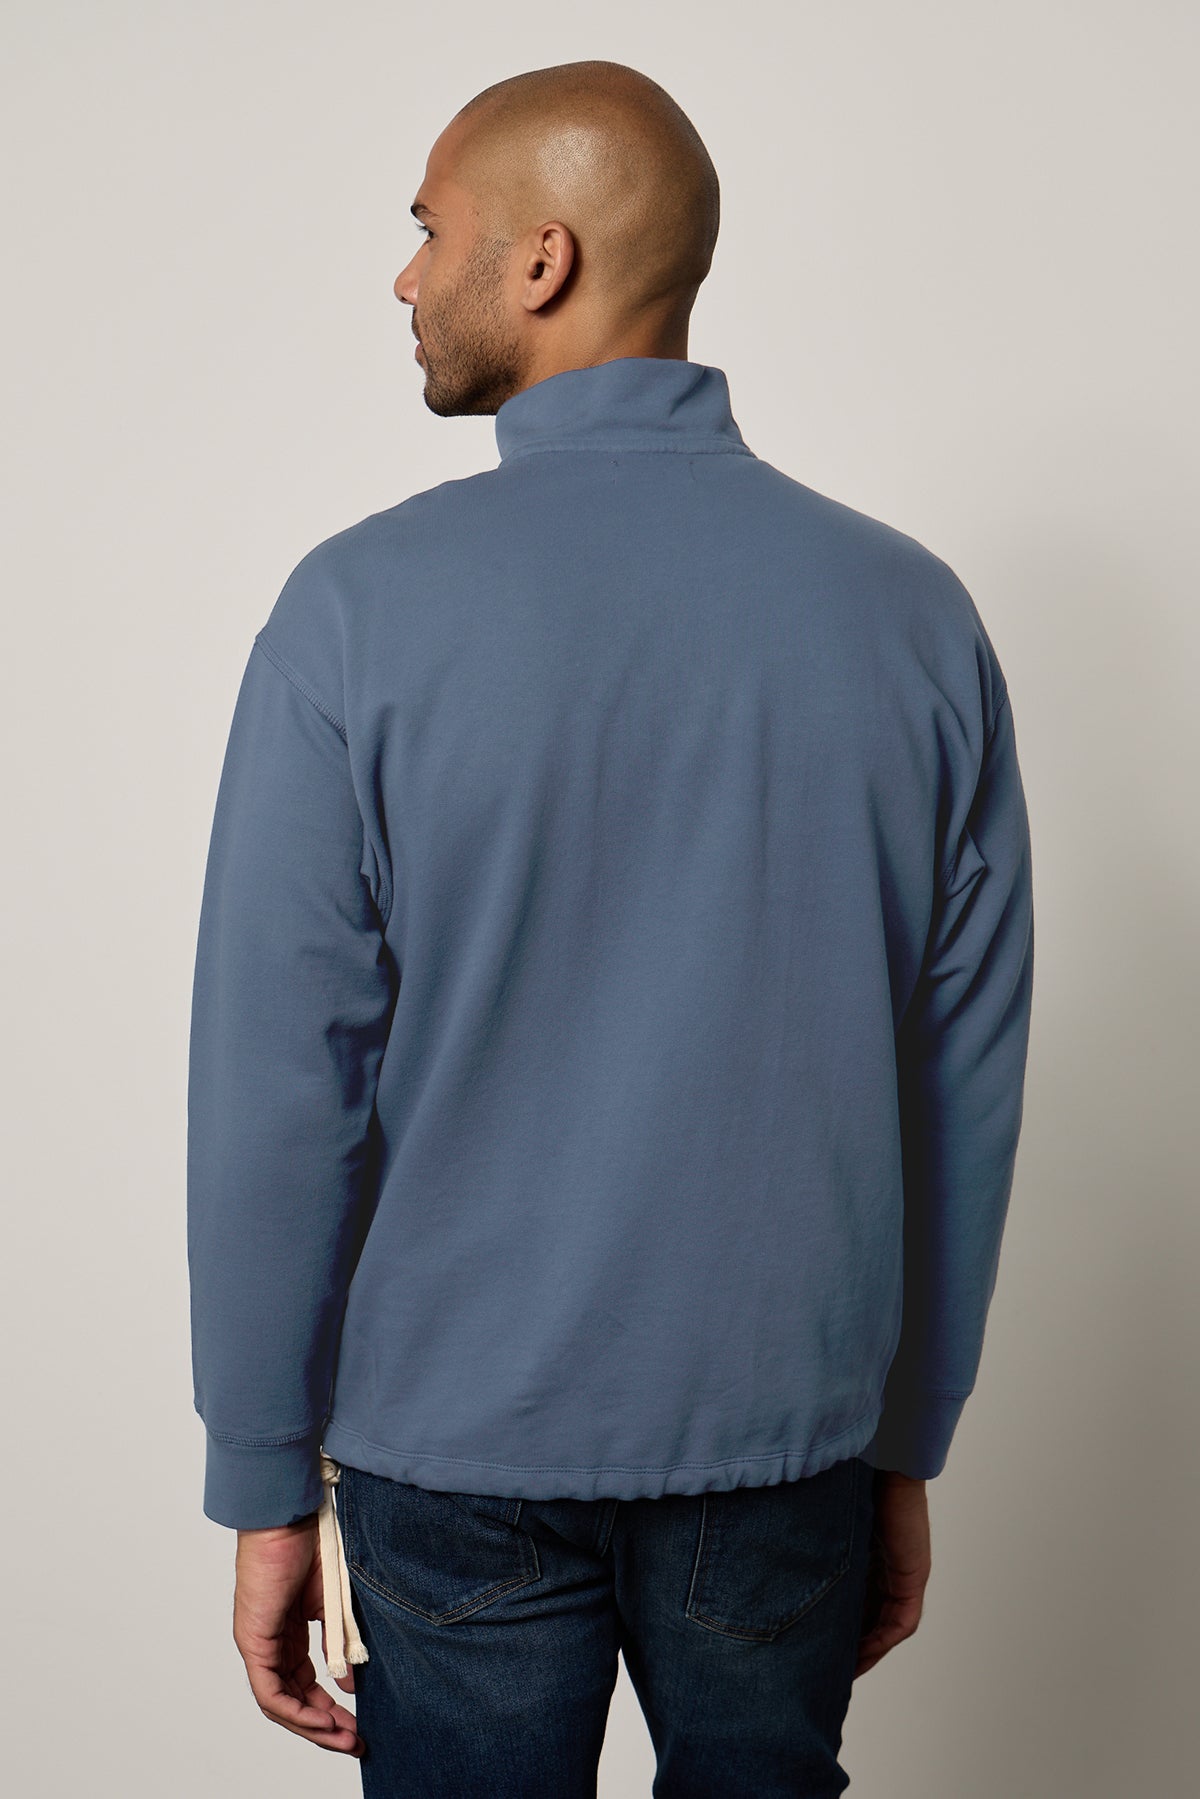   The back view of a man wearing a Velvet by Graham & Spencer Patrick quarter-zip sweatshirt. 